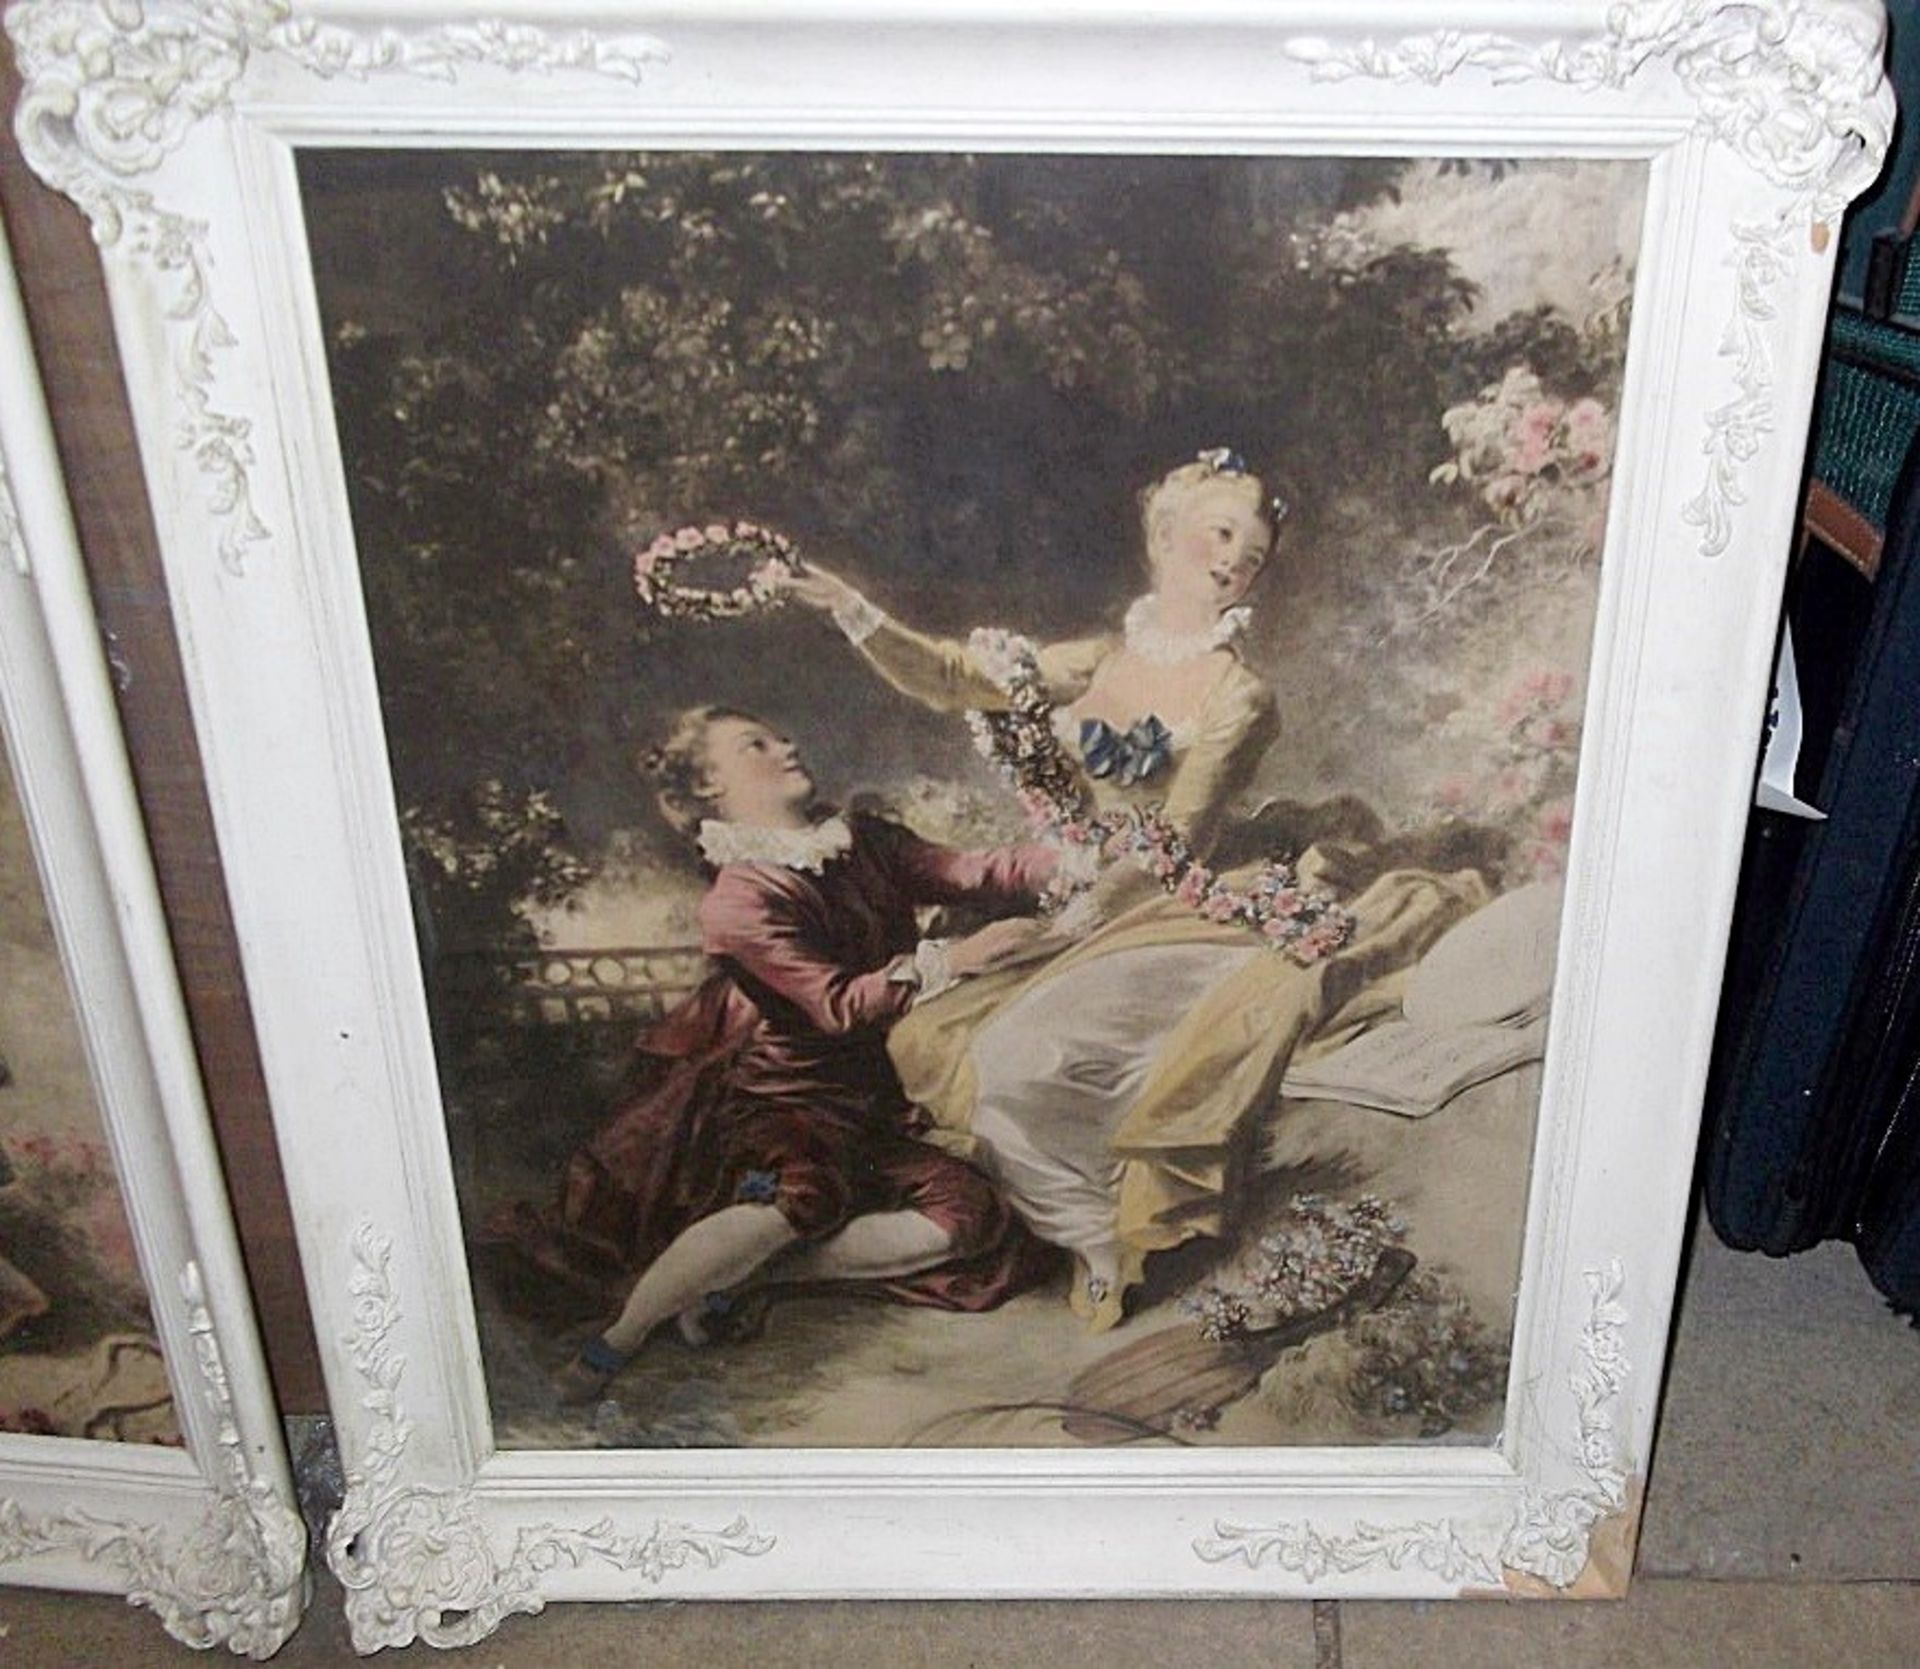 A Pair Of Framed Baroque Art Prints By B&S Creations, New York - Both Very Rare & Charming - Image 7 of 7